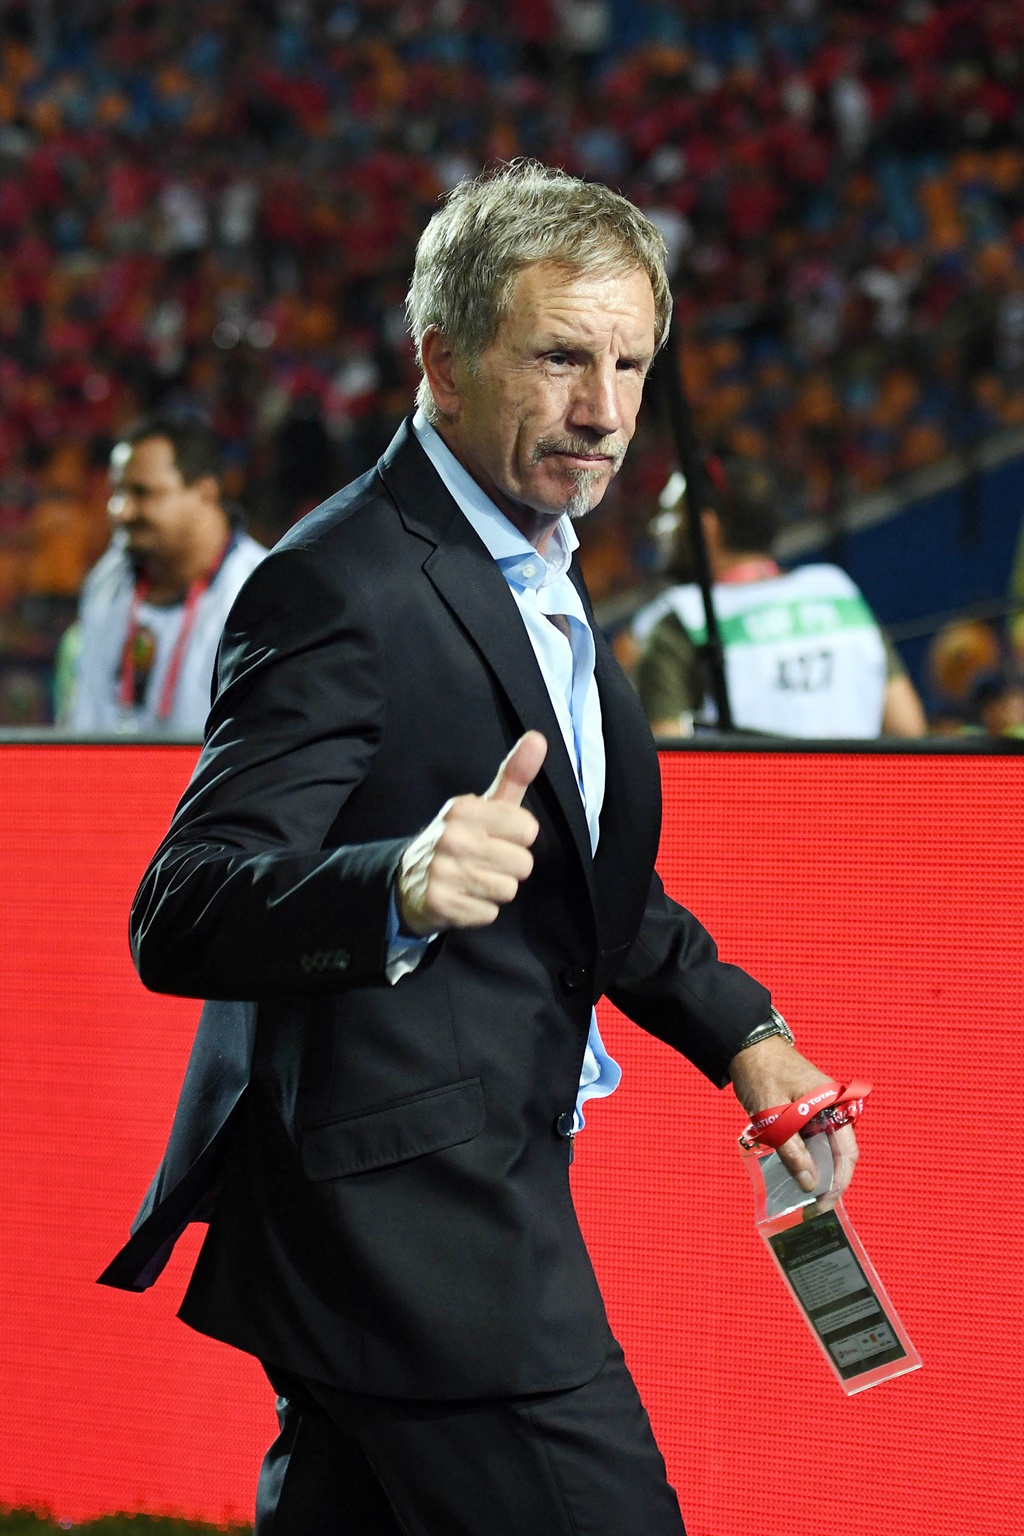 Stuart Baxter head coach of South Africa gives a thumb up after the African Cup of Nations, Last 16 match between Egypt and South Africa at Cairo International Stadium on July 06, 2019 in Cairo, Egypt. (Photo by Ahmed Hasan/Gallo Images)